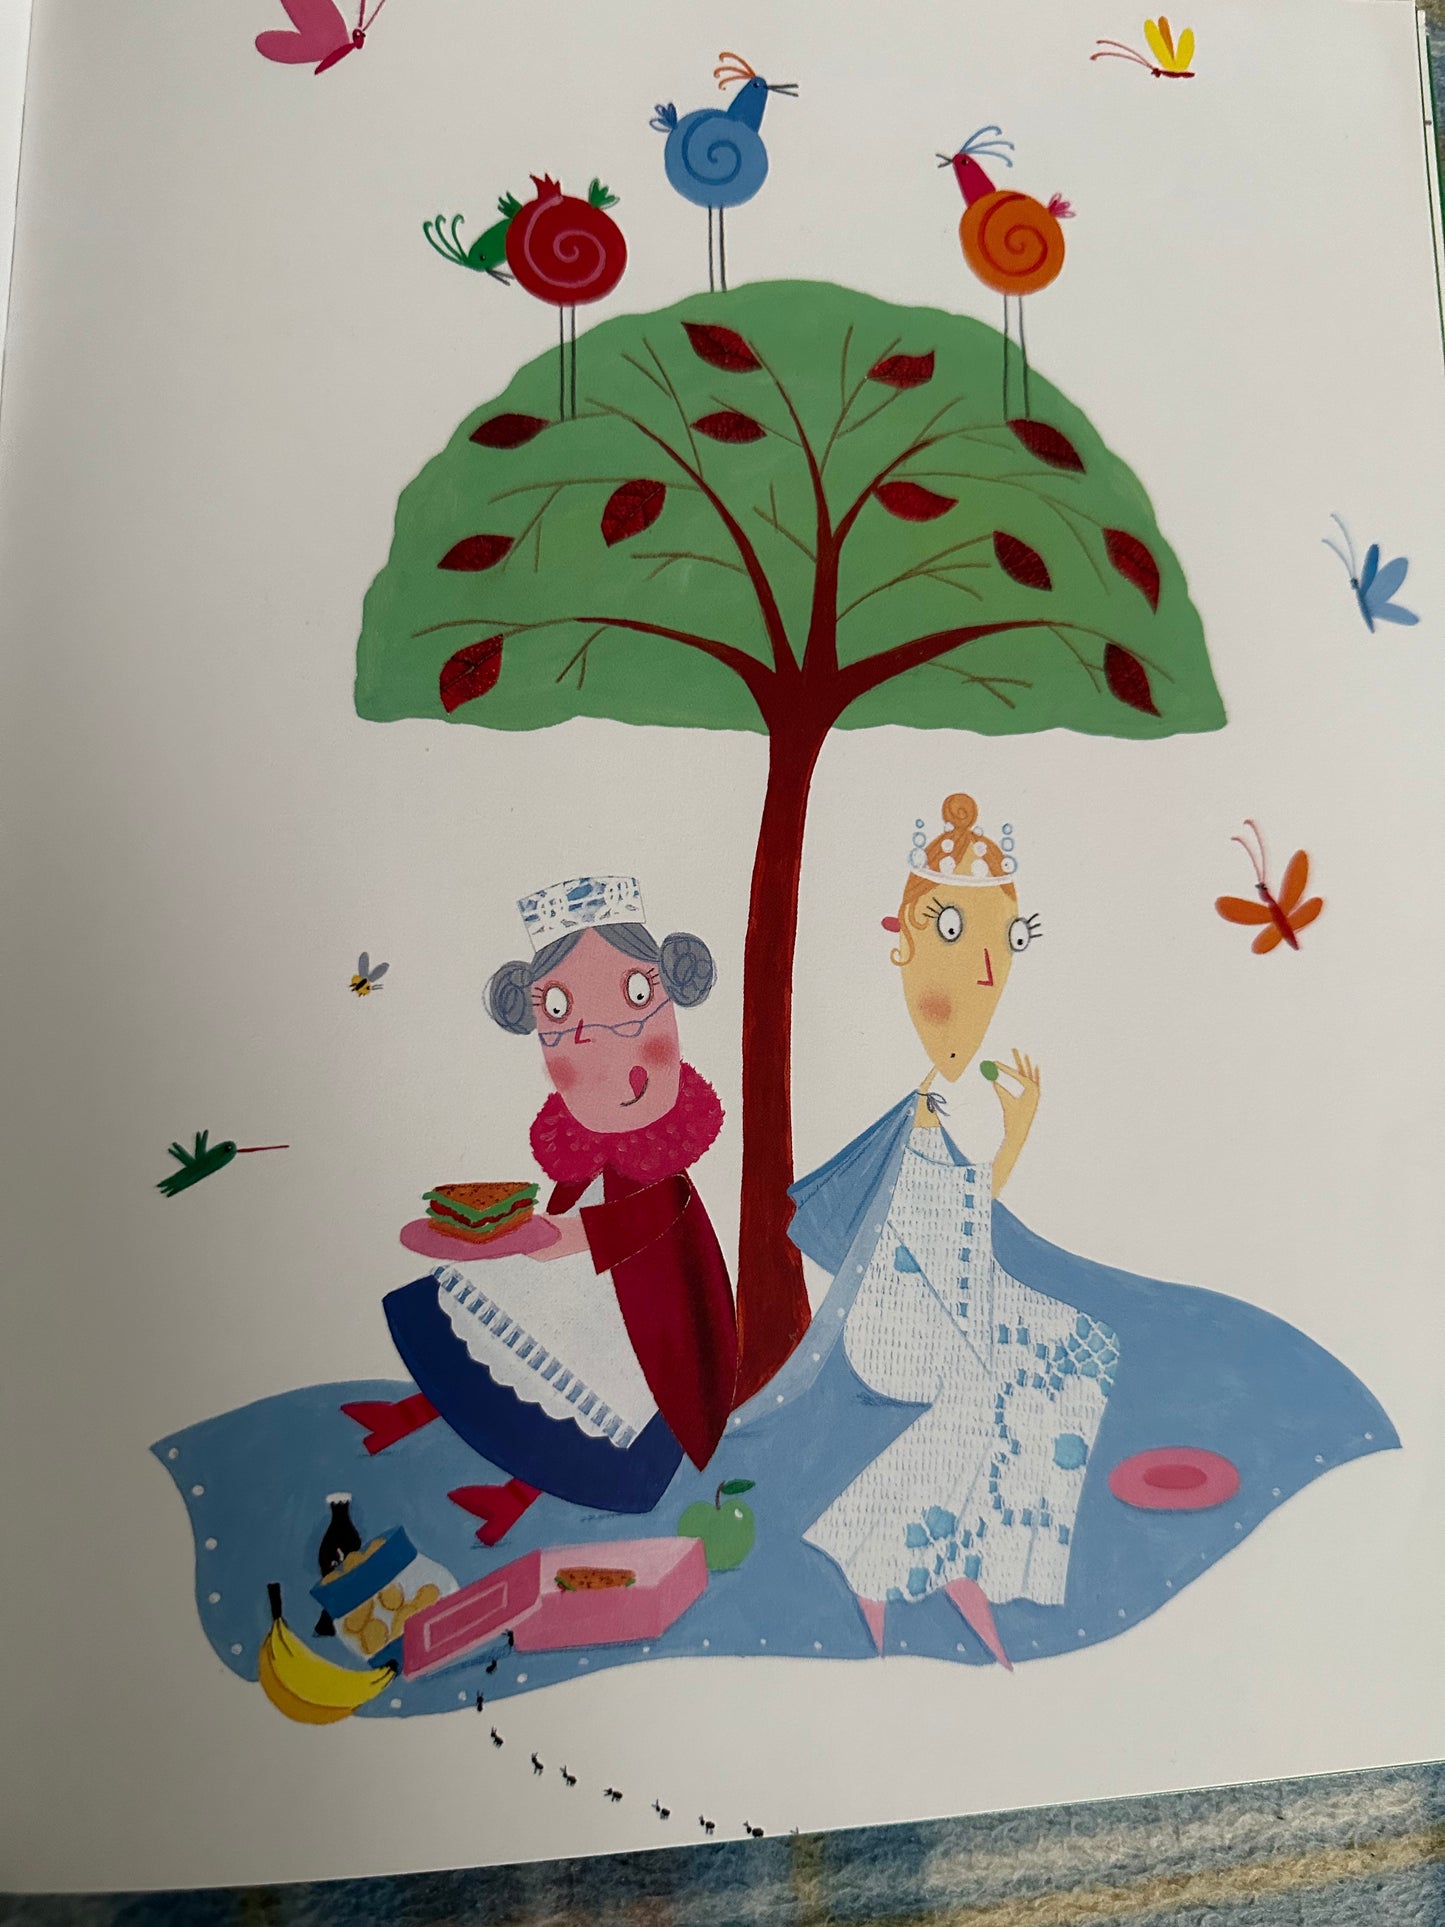 2018*1st* Queen Munch & Queen Nibble - Carol Ann Duffy(Poet Laureate) Illust Lydia Monks(Two Hoots Publisher)